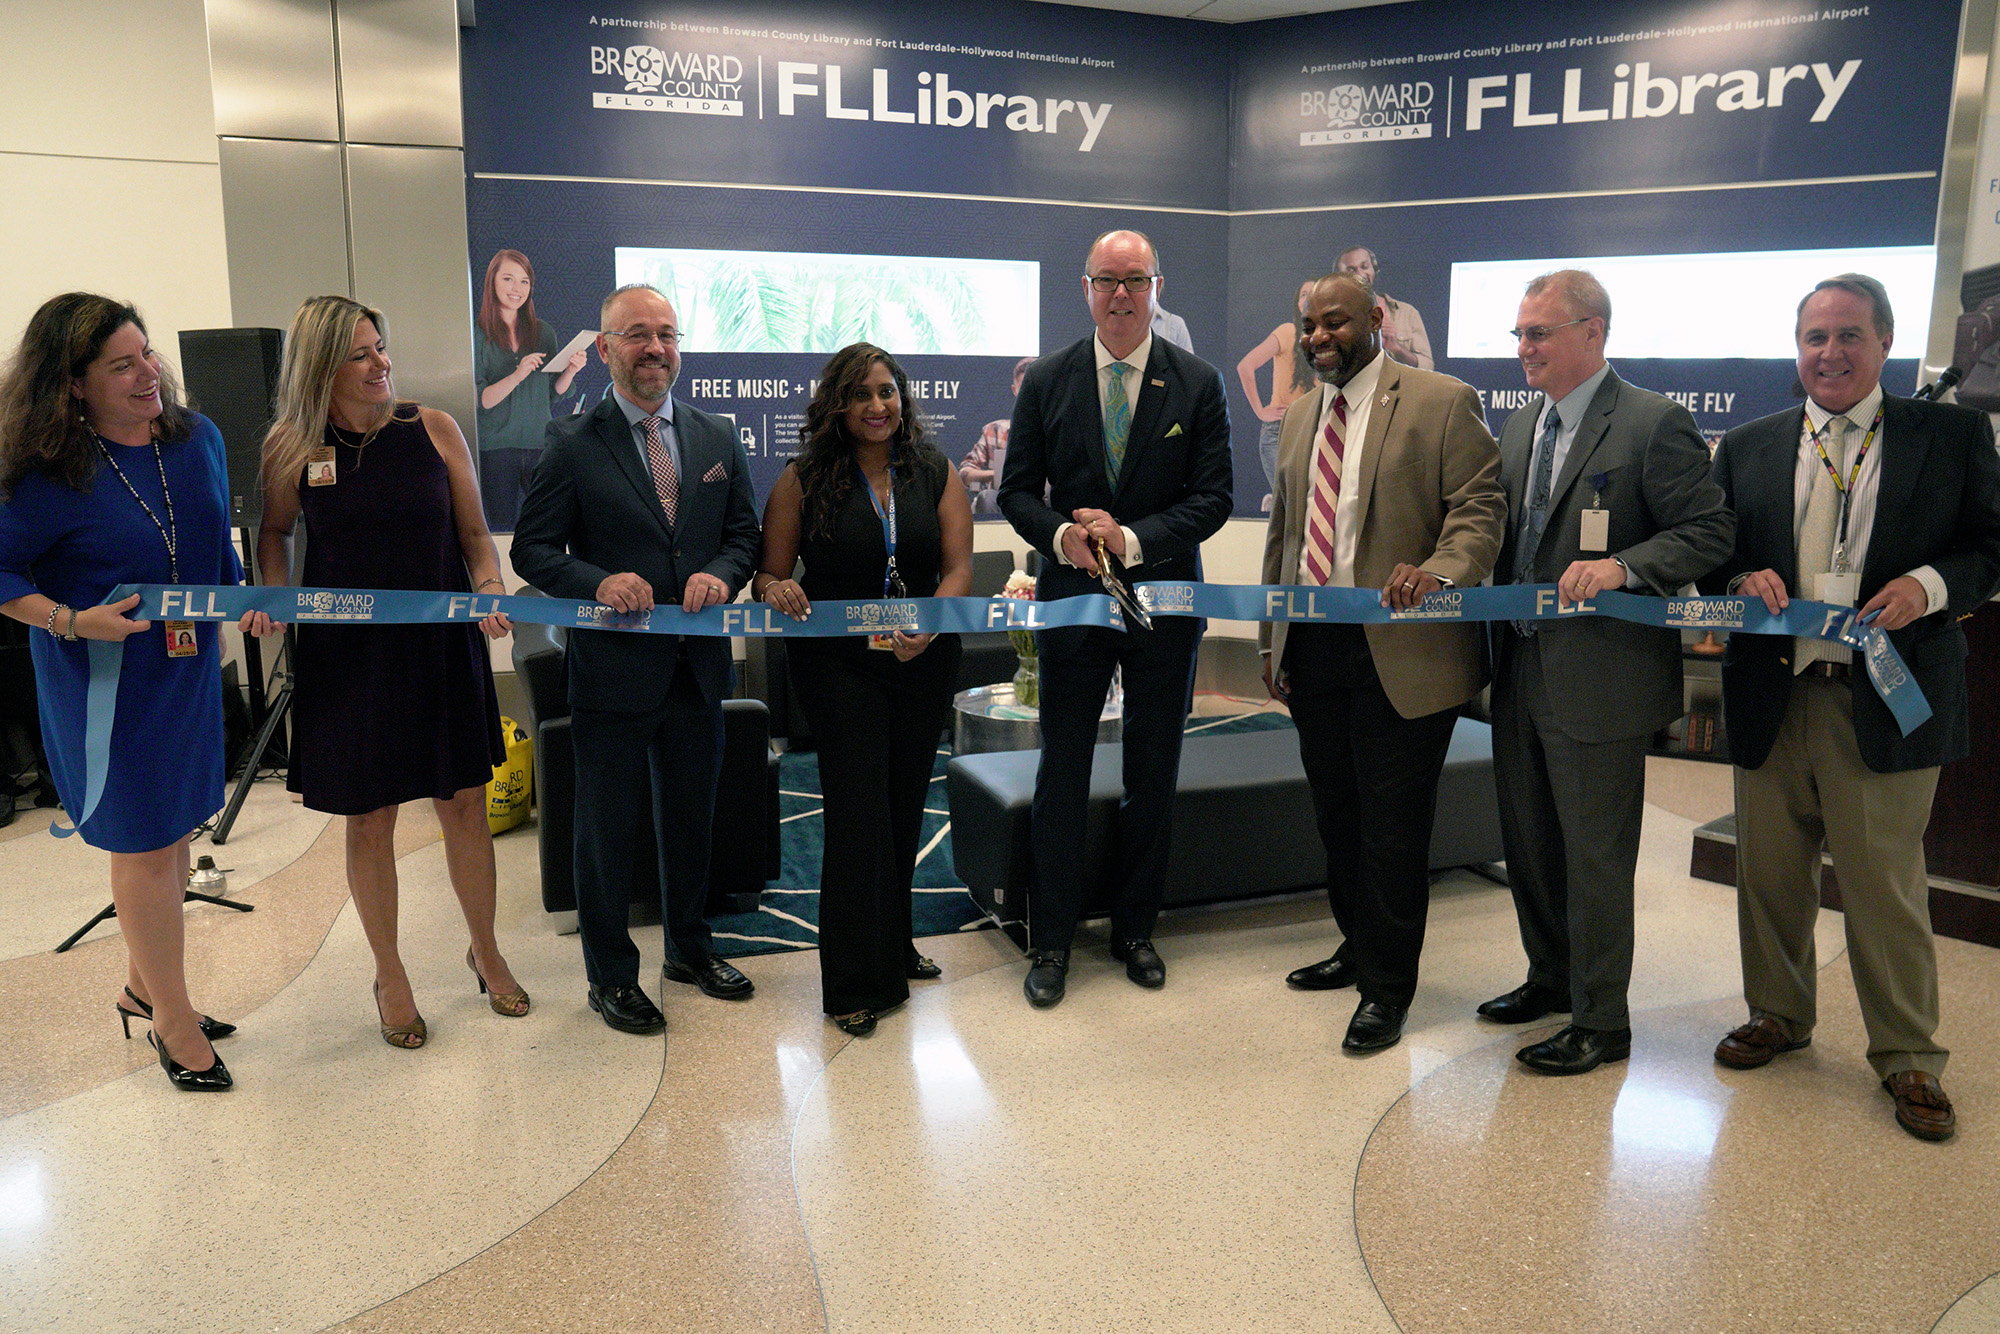 Left to right: Celina Saucedo, Aviation Asst. Director; Christina Roldan, Aviation Public Art Project Manager; Stephen Grubb, Library Public Information Officer; Ria Mohammed, Aviation Administrative Coordinator; Lamar P. Fisher, Broward County Commissioner; Kelvin Watson, Library Director; Mark Gale, Aviation Director; Greg Meyer, Aviation Public Information Officer.